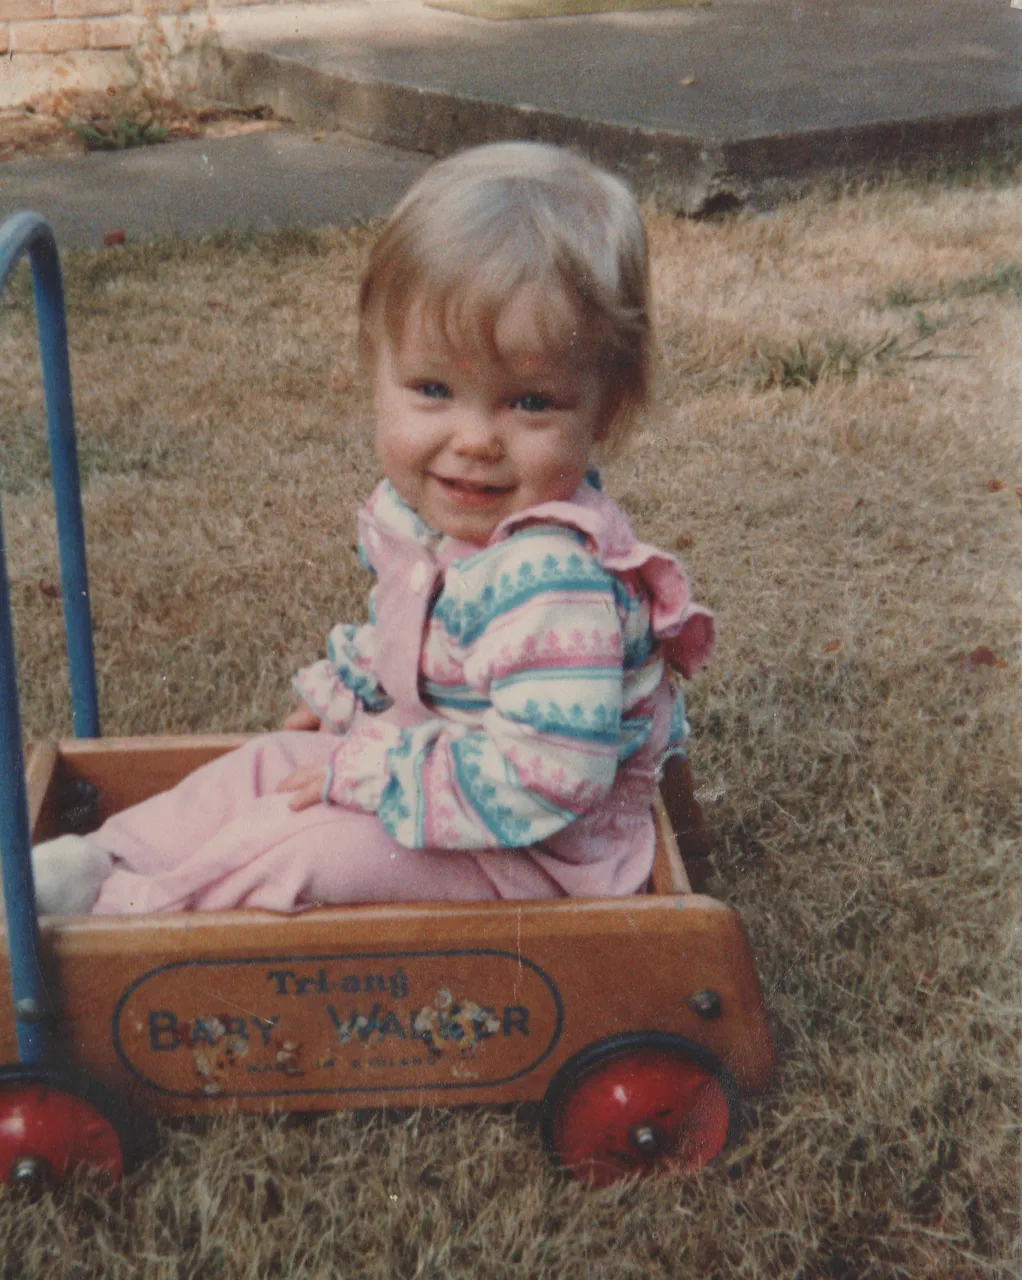 1982 Katie Tri Ang Baby Walker Wagon Pink Overalls apx date.png